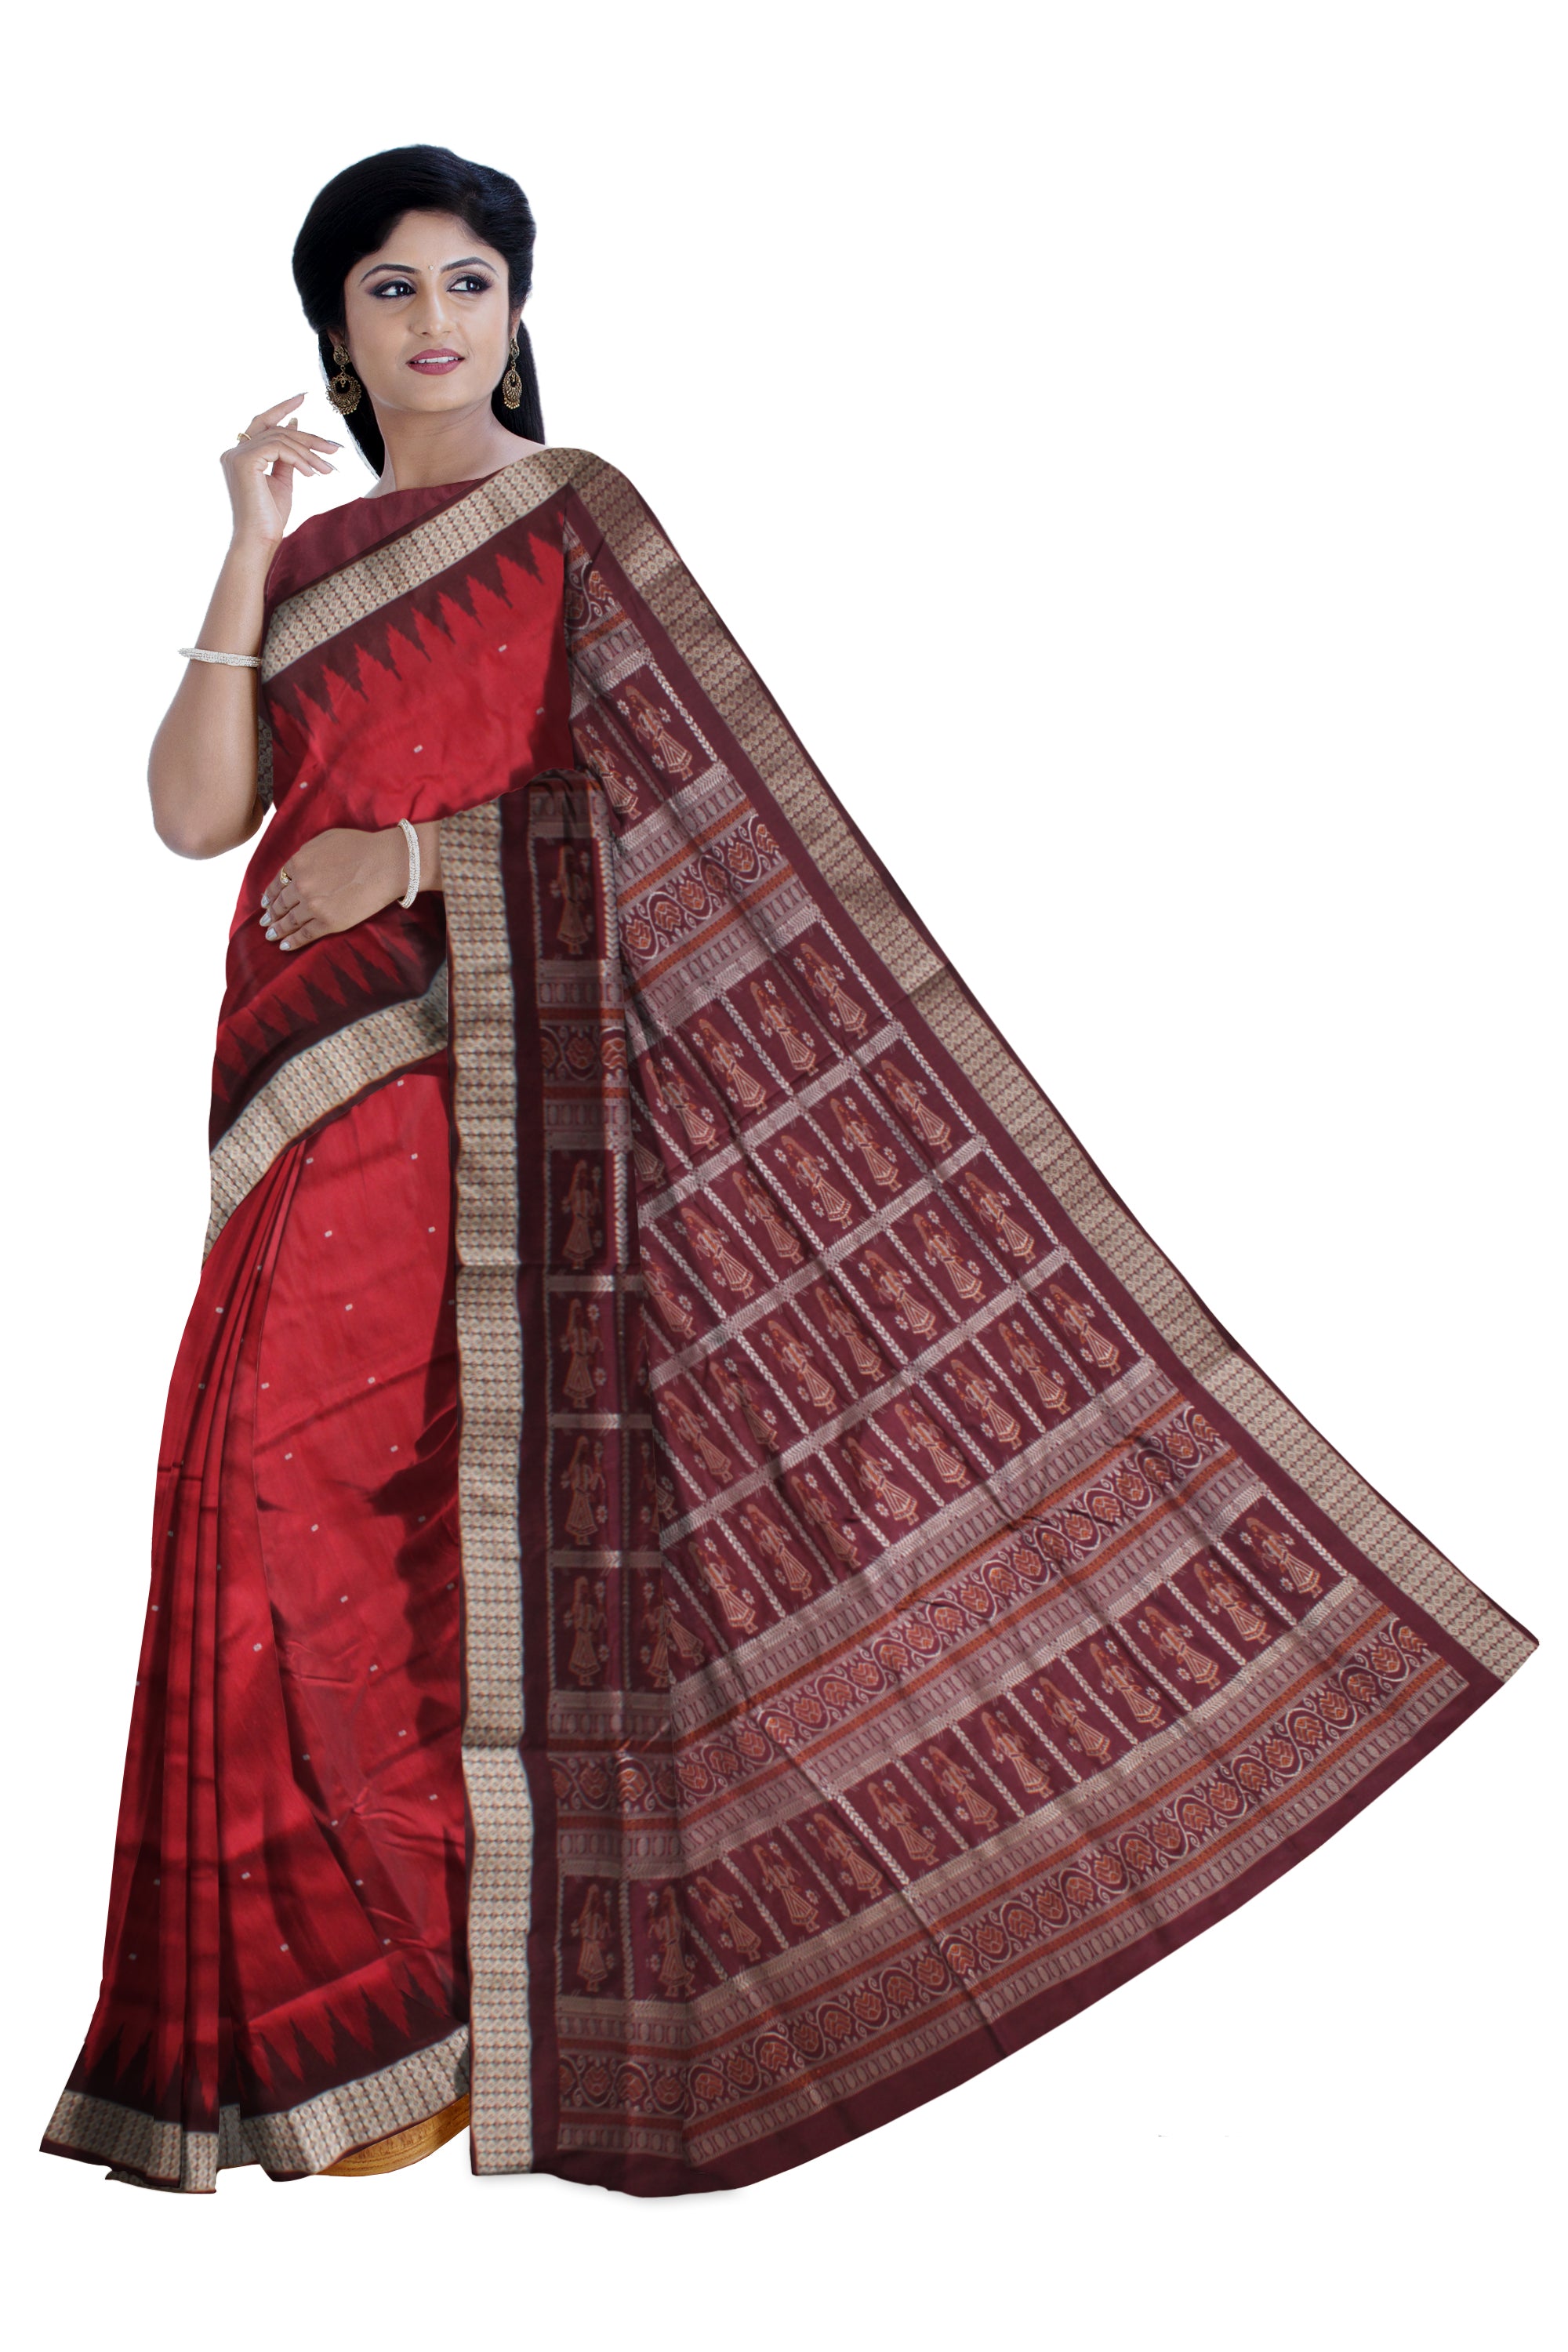 PALLU DOLL PRINT AND BODY SMALL BOOTY PATTERN PATA SAREE IS MAROON AND COFFEE COLOR BASE,WITH BLOUSE PIECE. - Koshali Arts & Crafts Enterprise